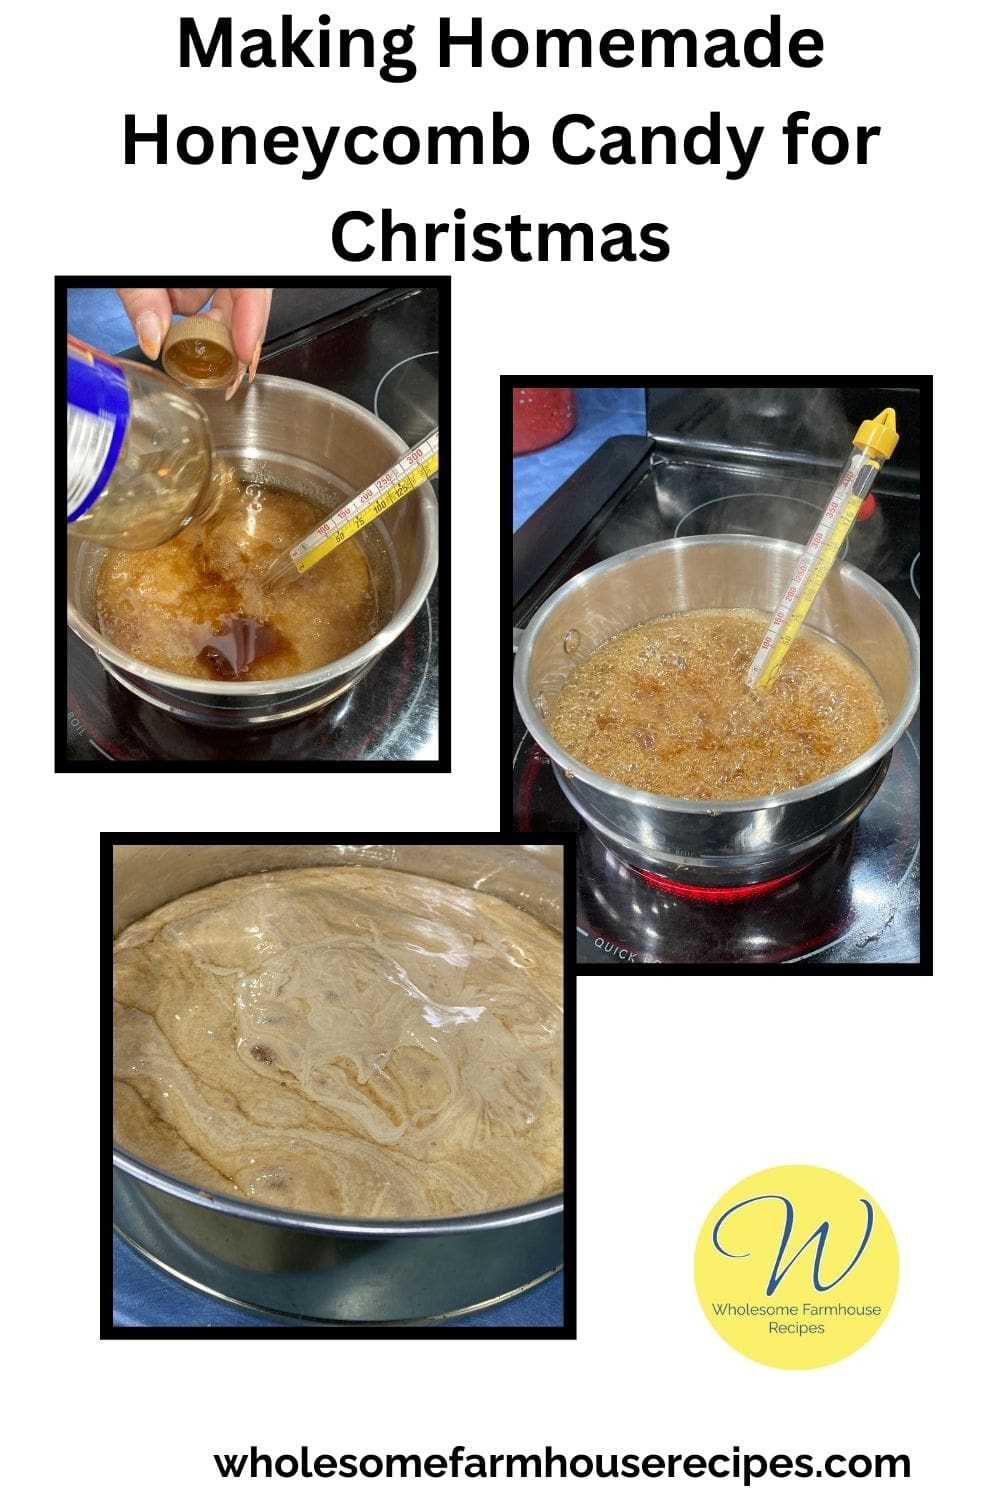 Making Homemade Honeycomb Candy for Christmas